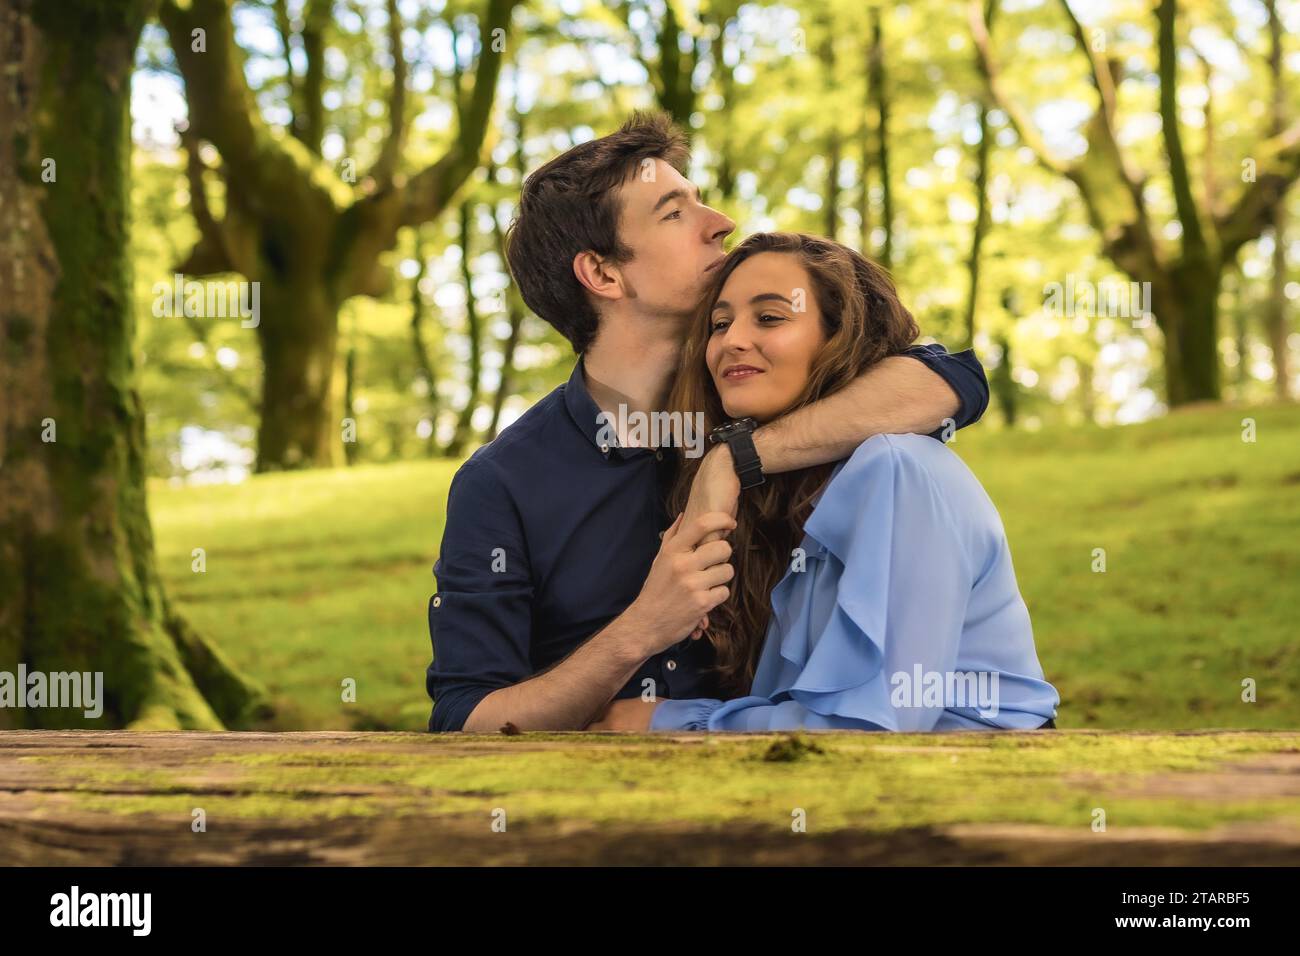 Frontal horizontal photo of tender scene of lovers embracing in a forest Stock Photo